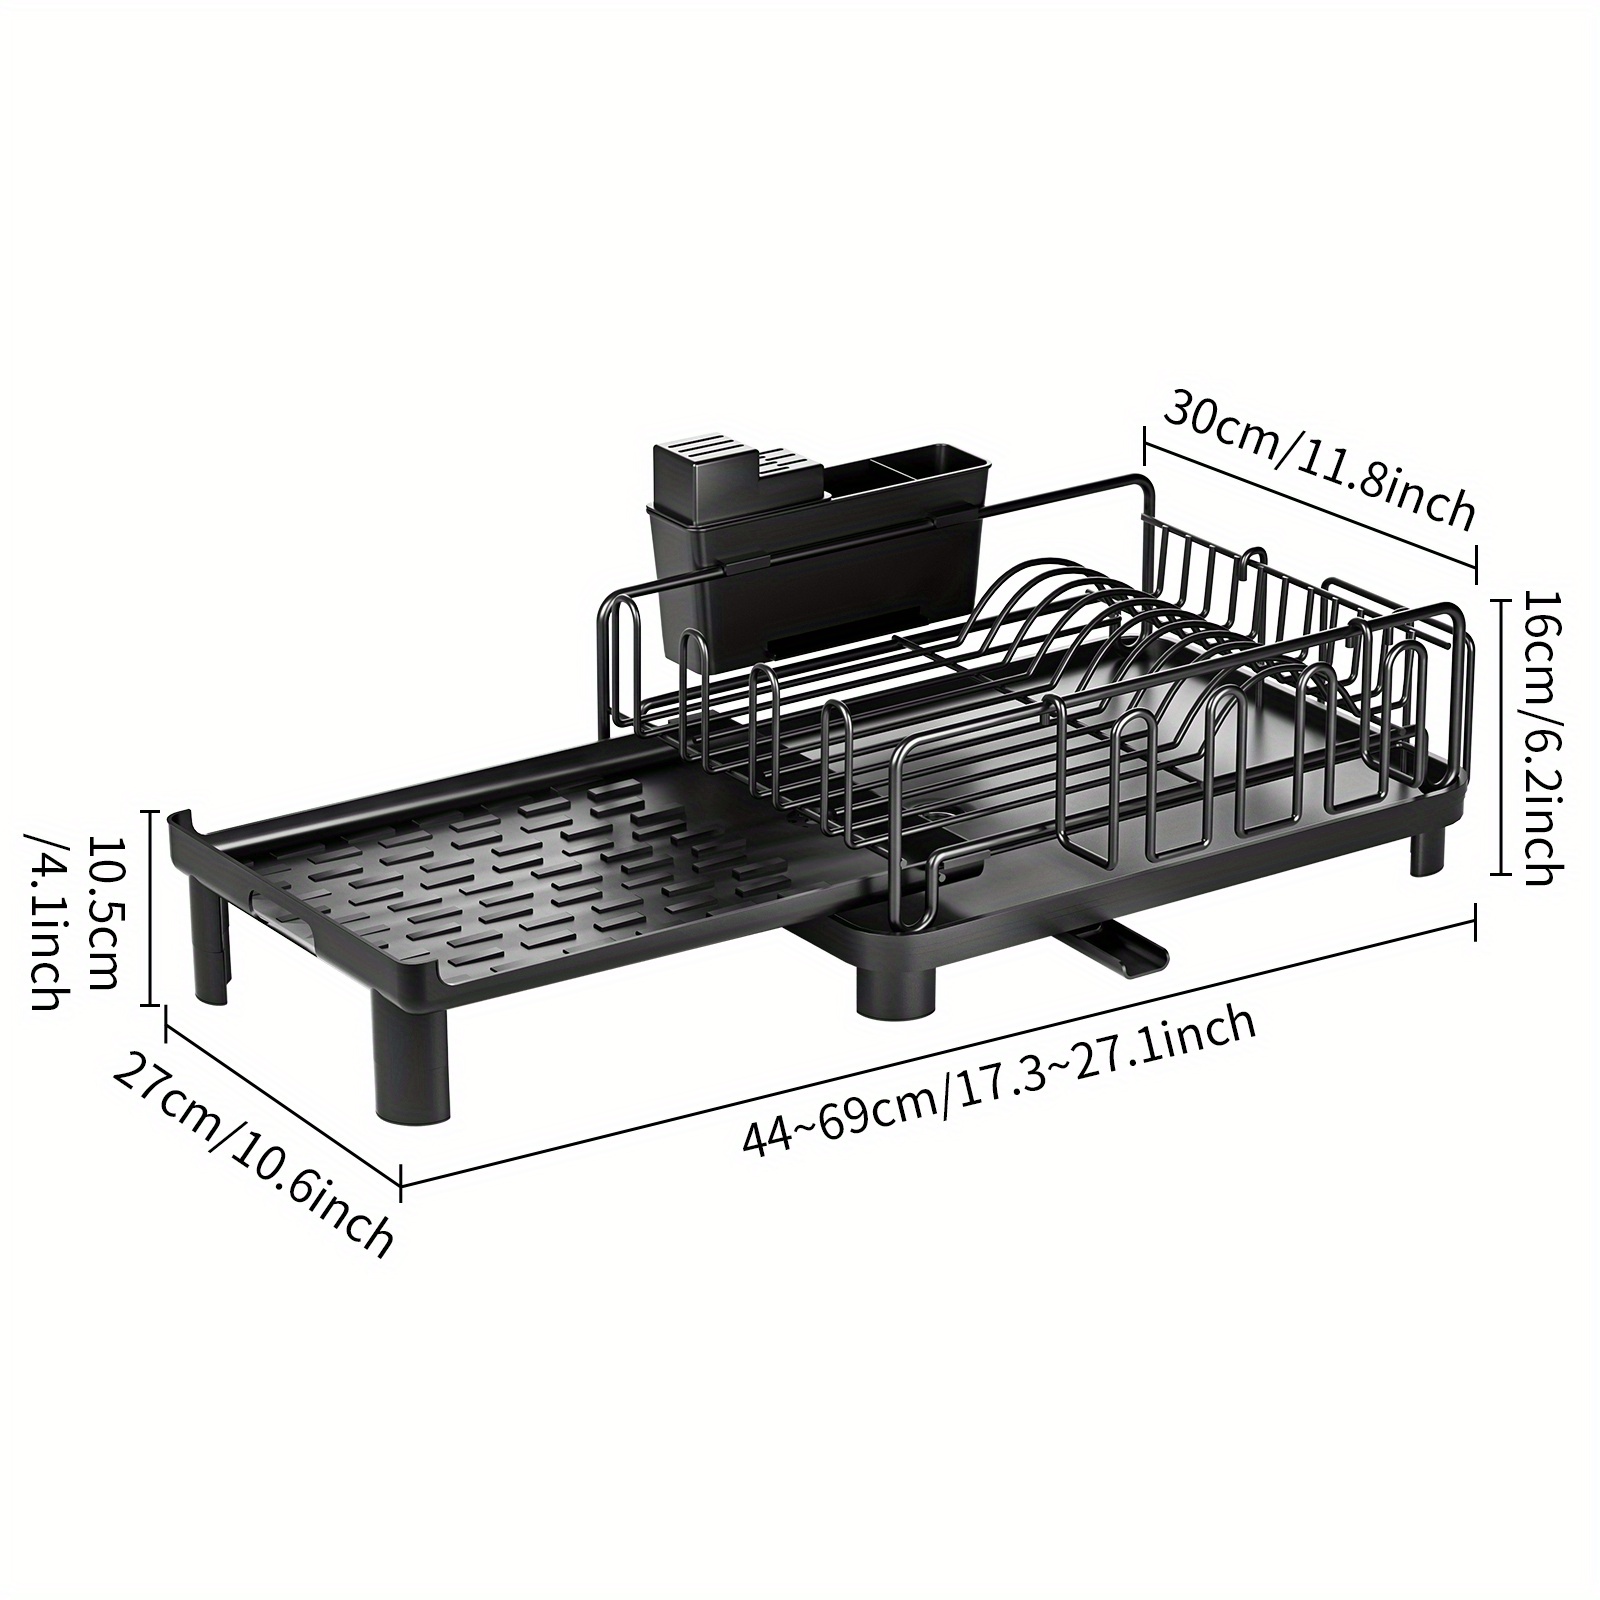 1pc Dish Drying Rack, Expandable Dish Racks For Kitchen Counter,  Multifunctional Extra Large Dish Strainers With Cutlery & Cup Holders,  Extendable Ant